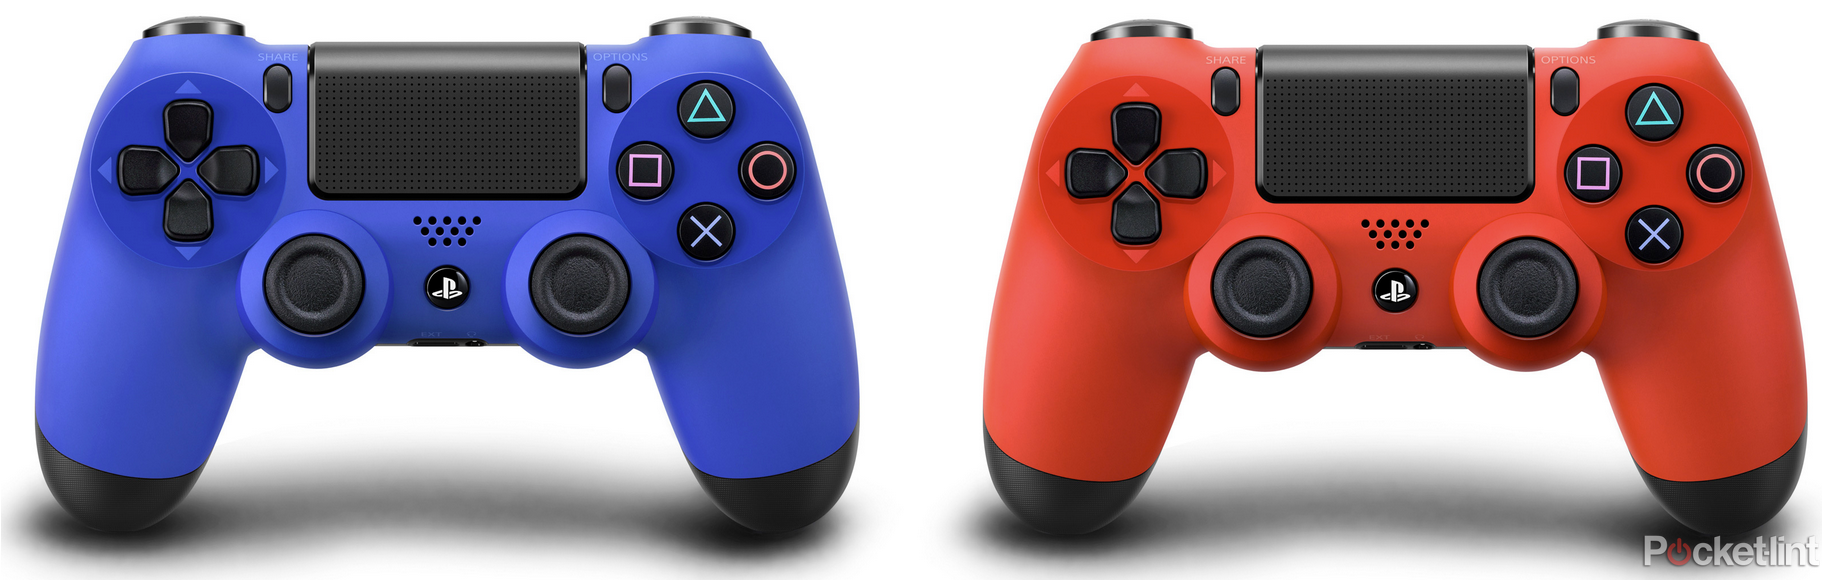 sony unveils magma red and wave blue dualshock 4 controllers for ps4 image 1